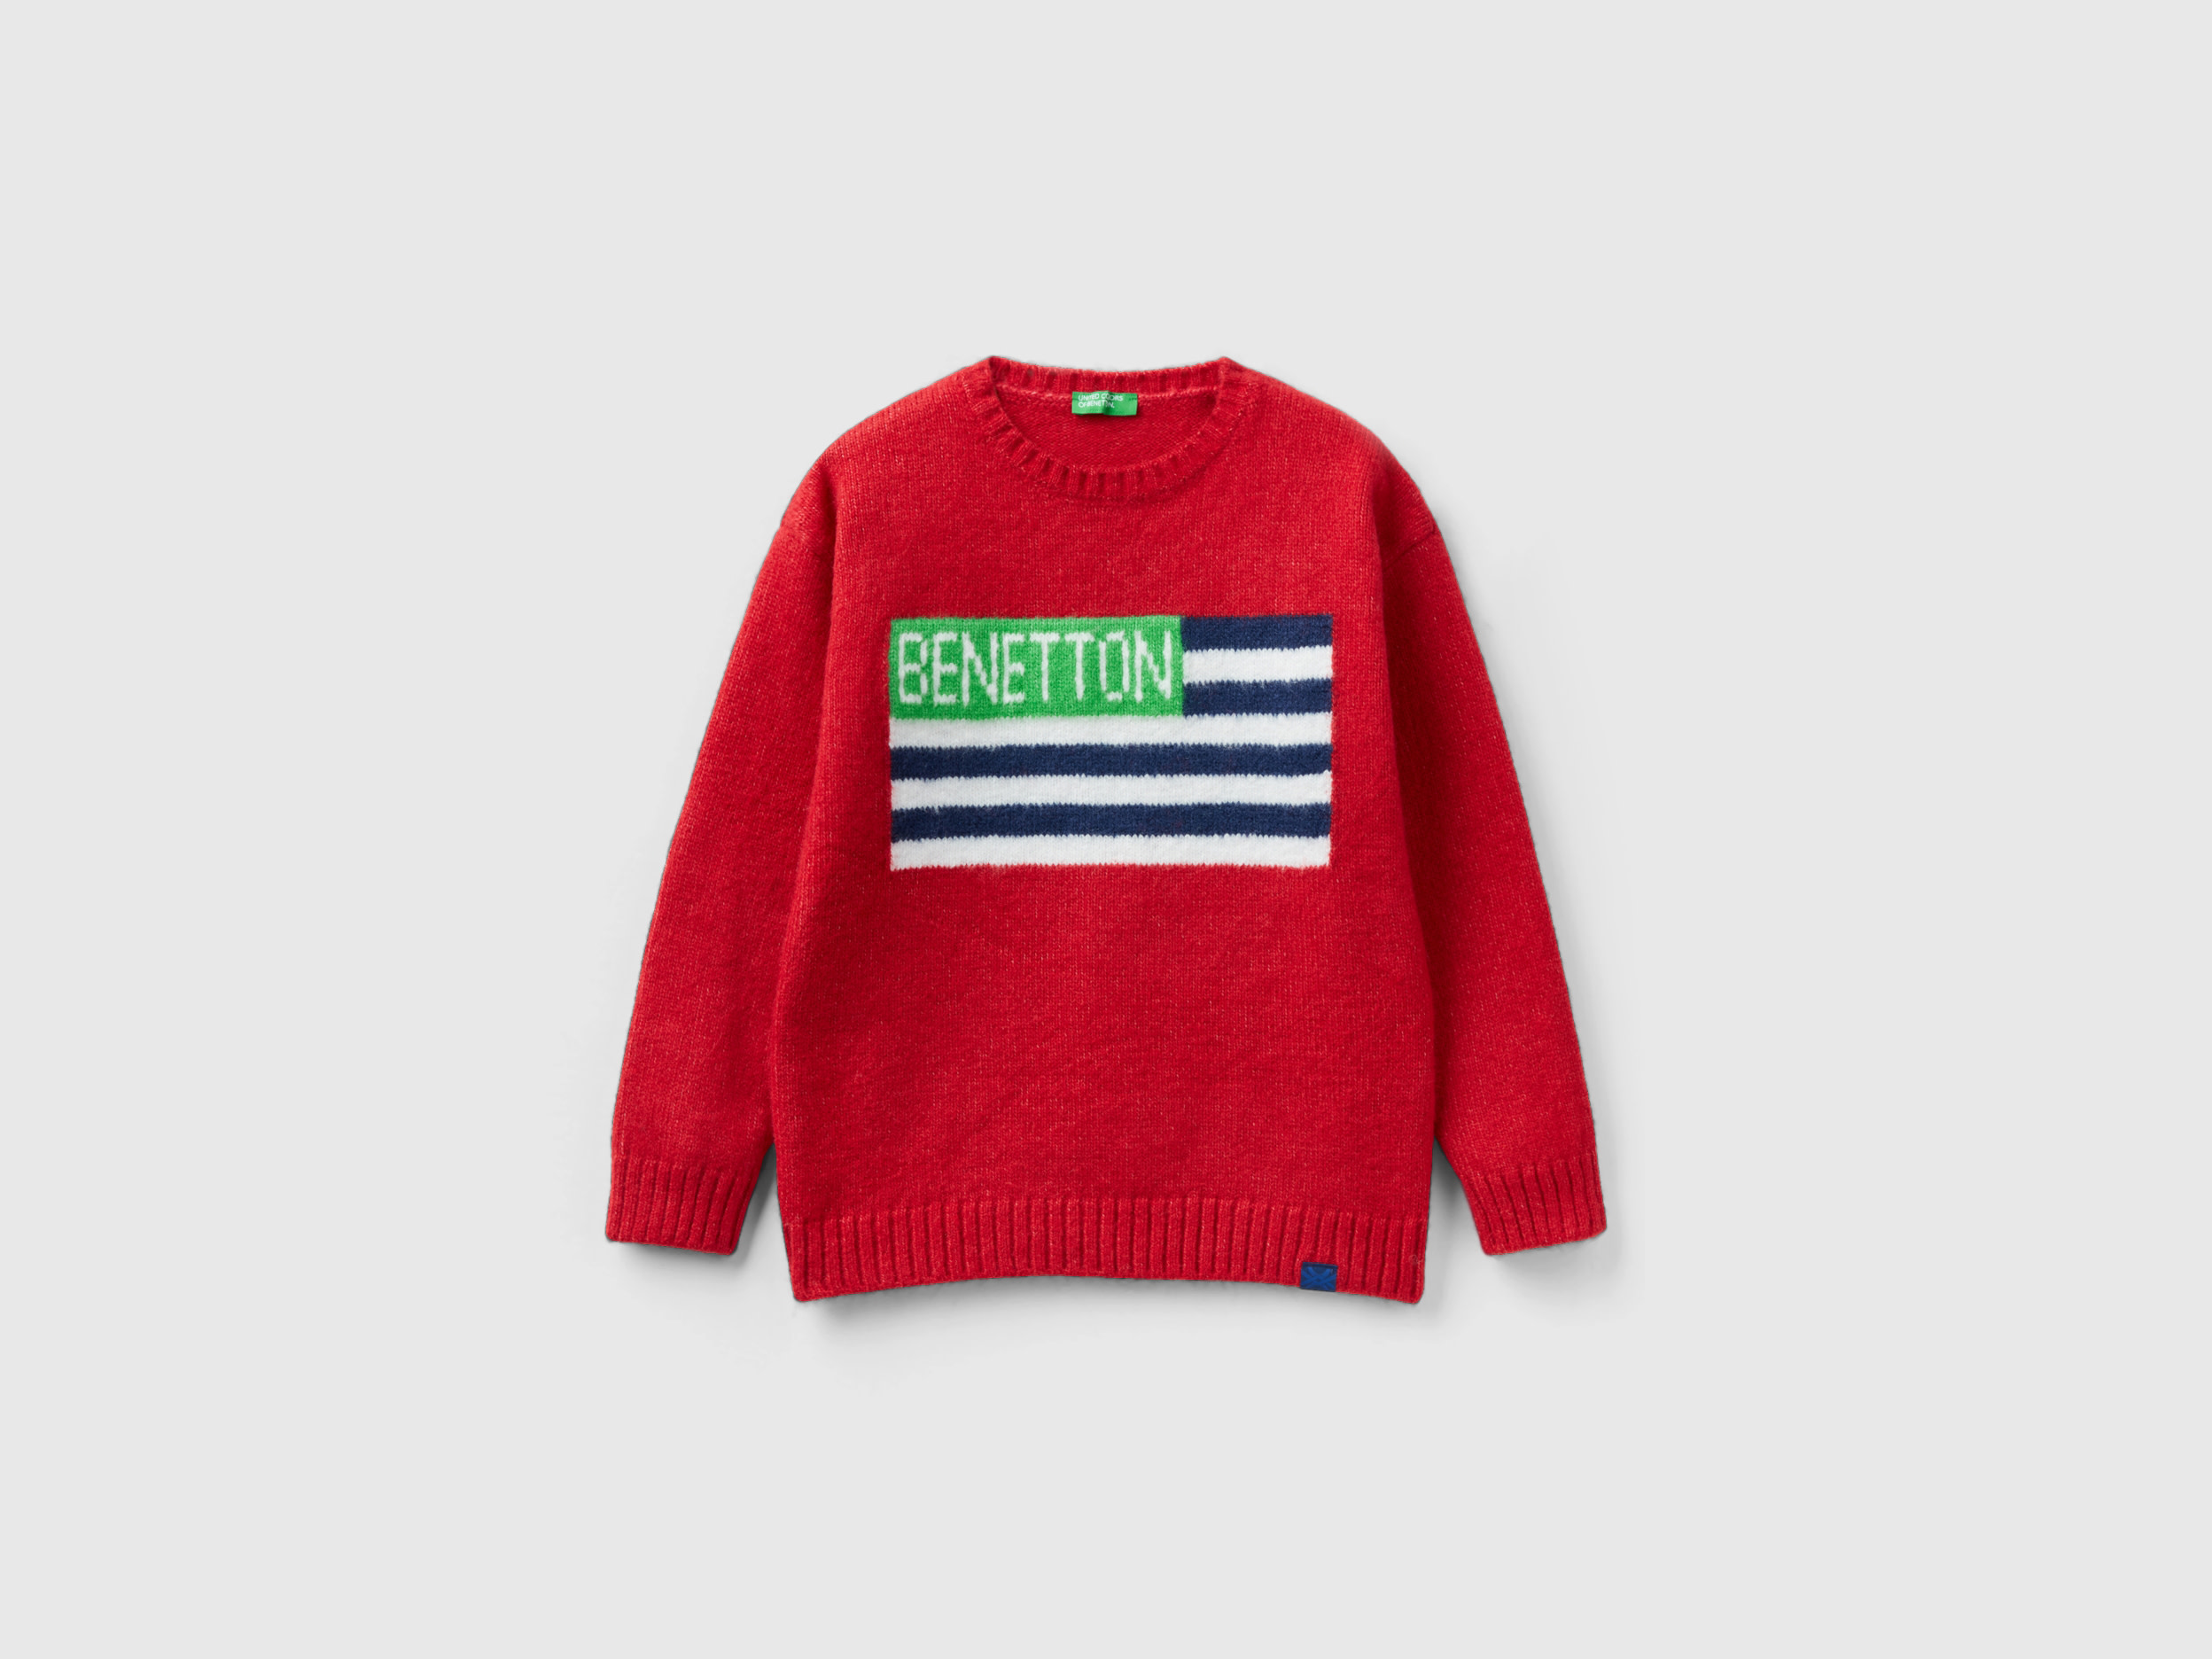 Benetton, Sweater With Flag Inlay, size 2XL, Red, Kids